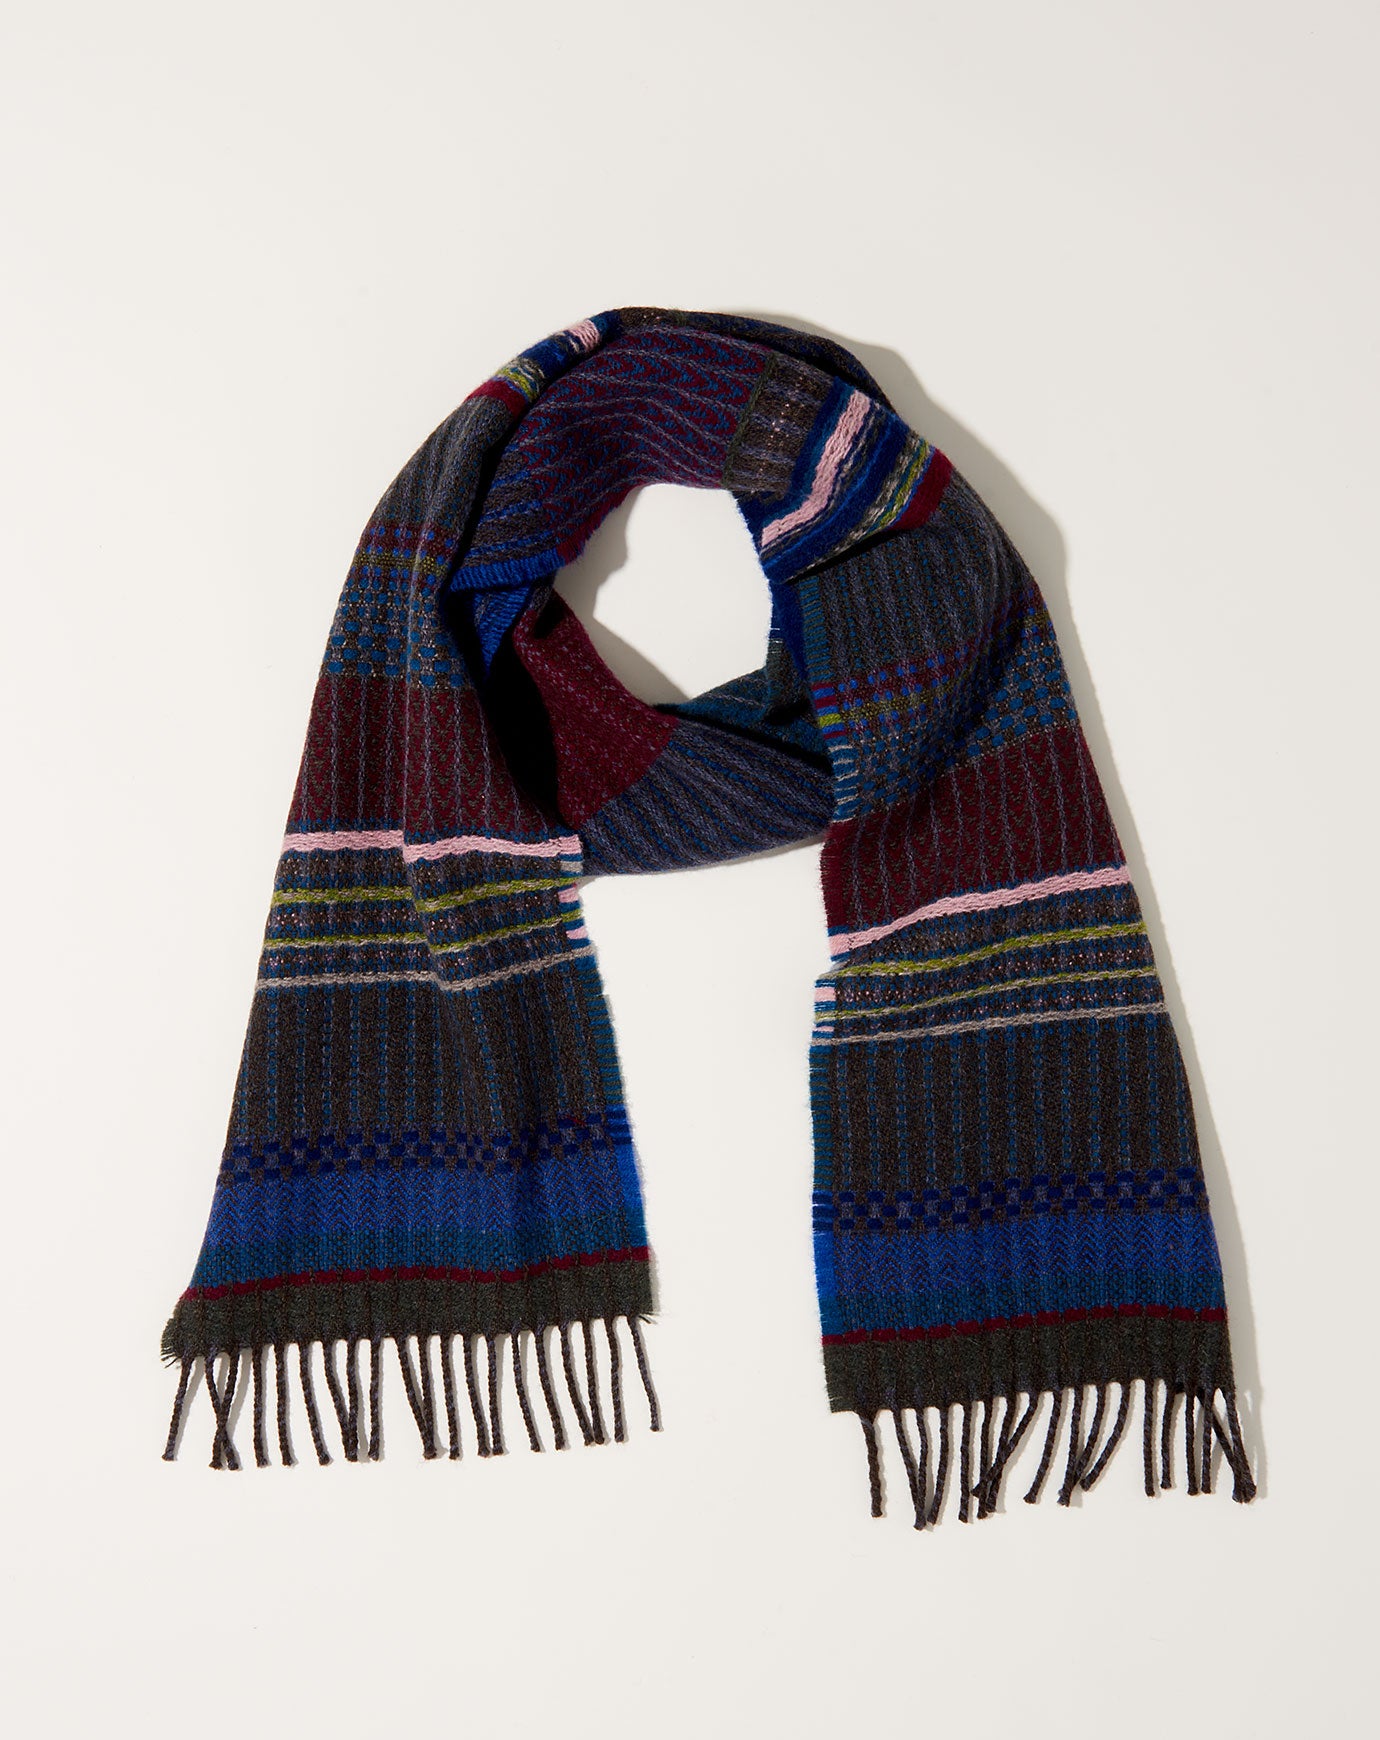 Wallace Sewell Wainscott Scarf in Coal